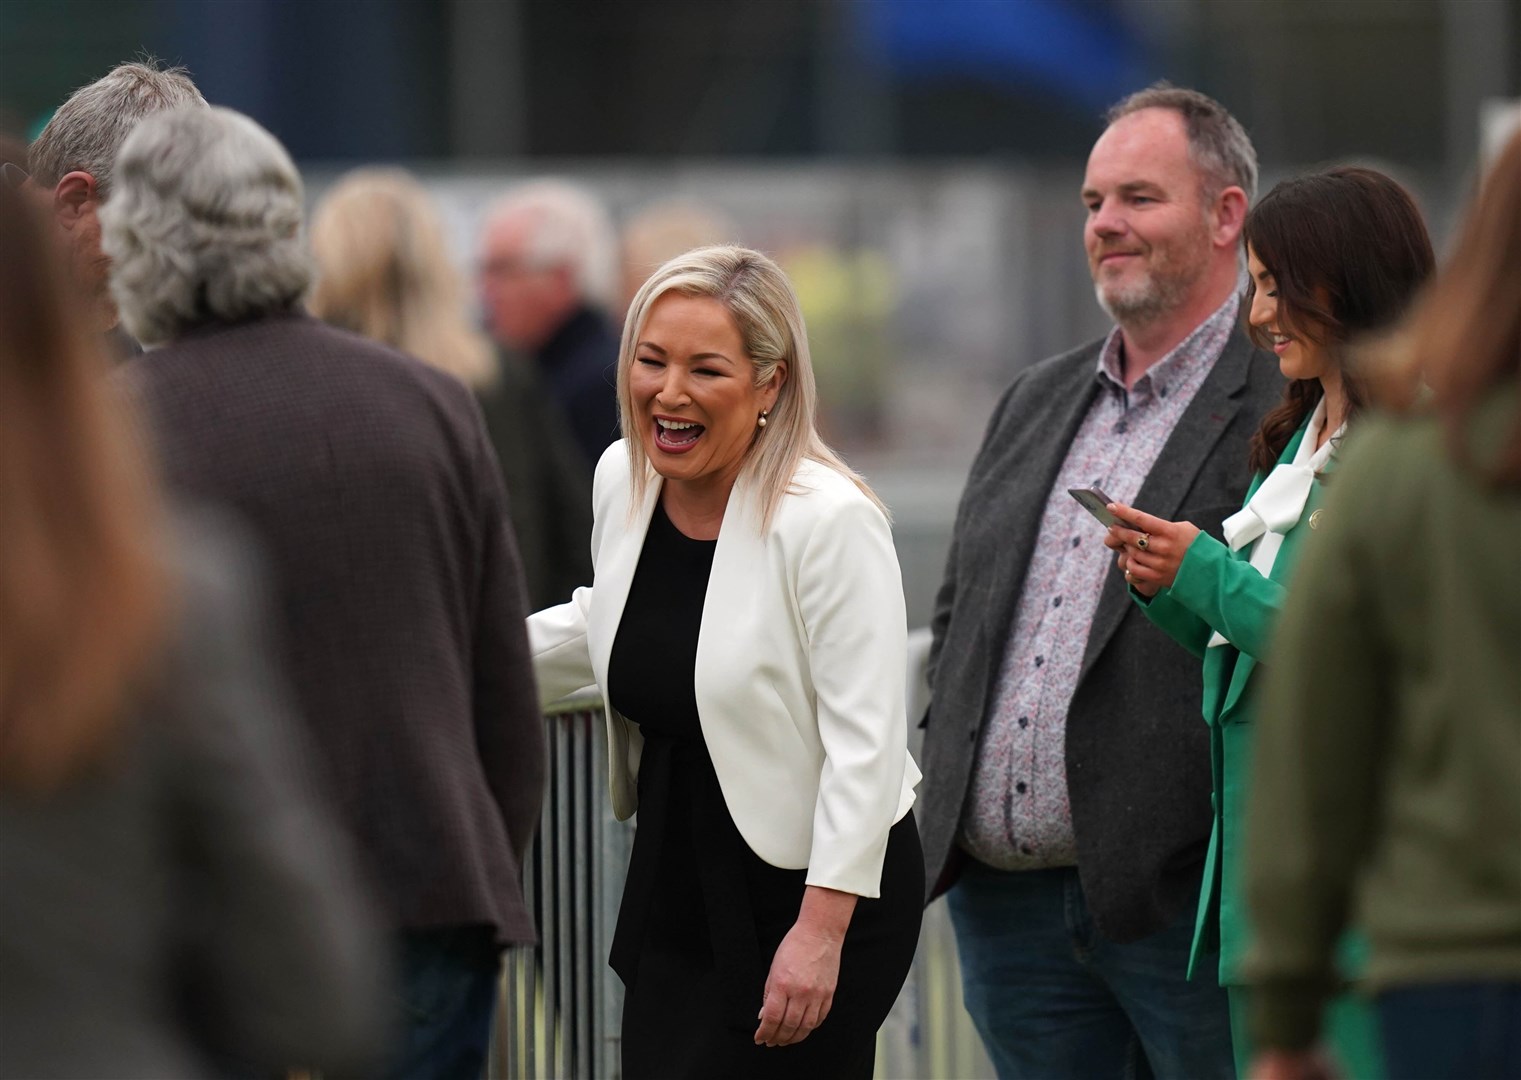 Sinn Fein’s Michelle O’Neill talks to party colleagues at Meadowbank sports arena (Niall Carson/PA)